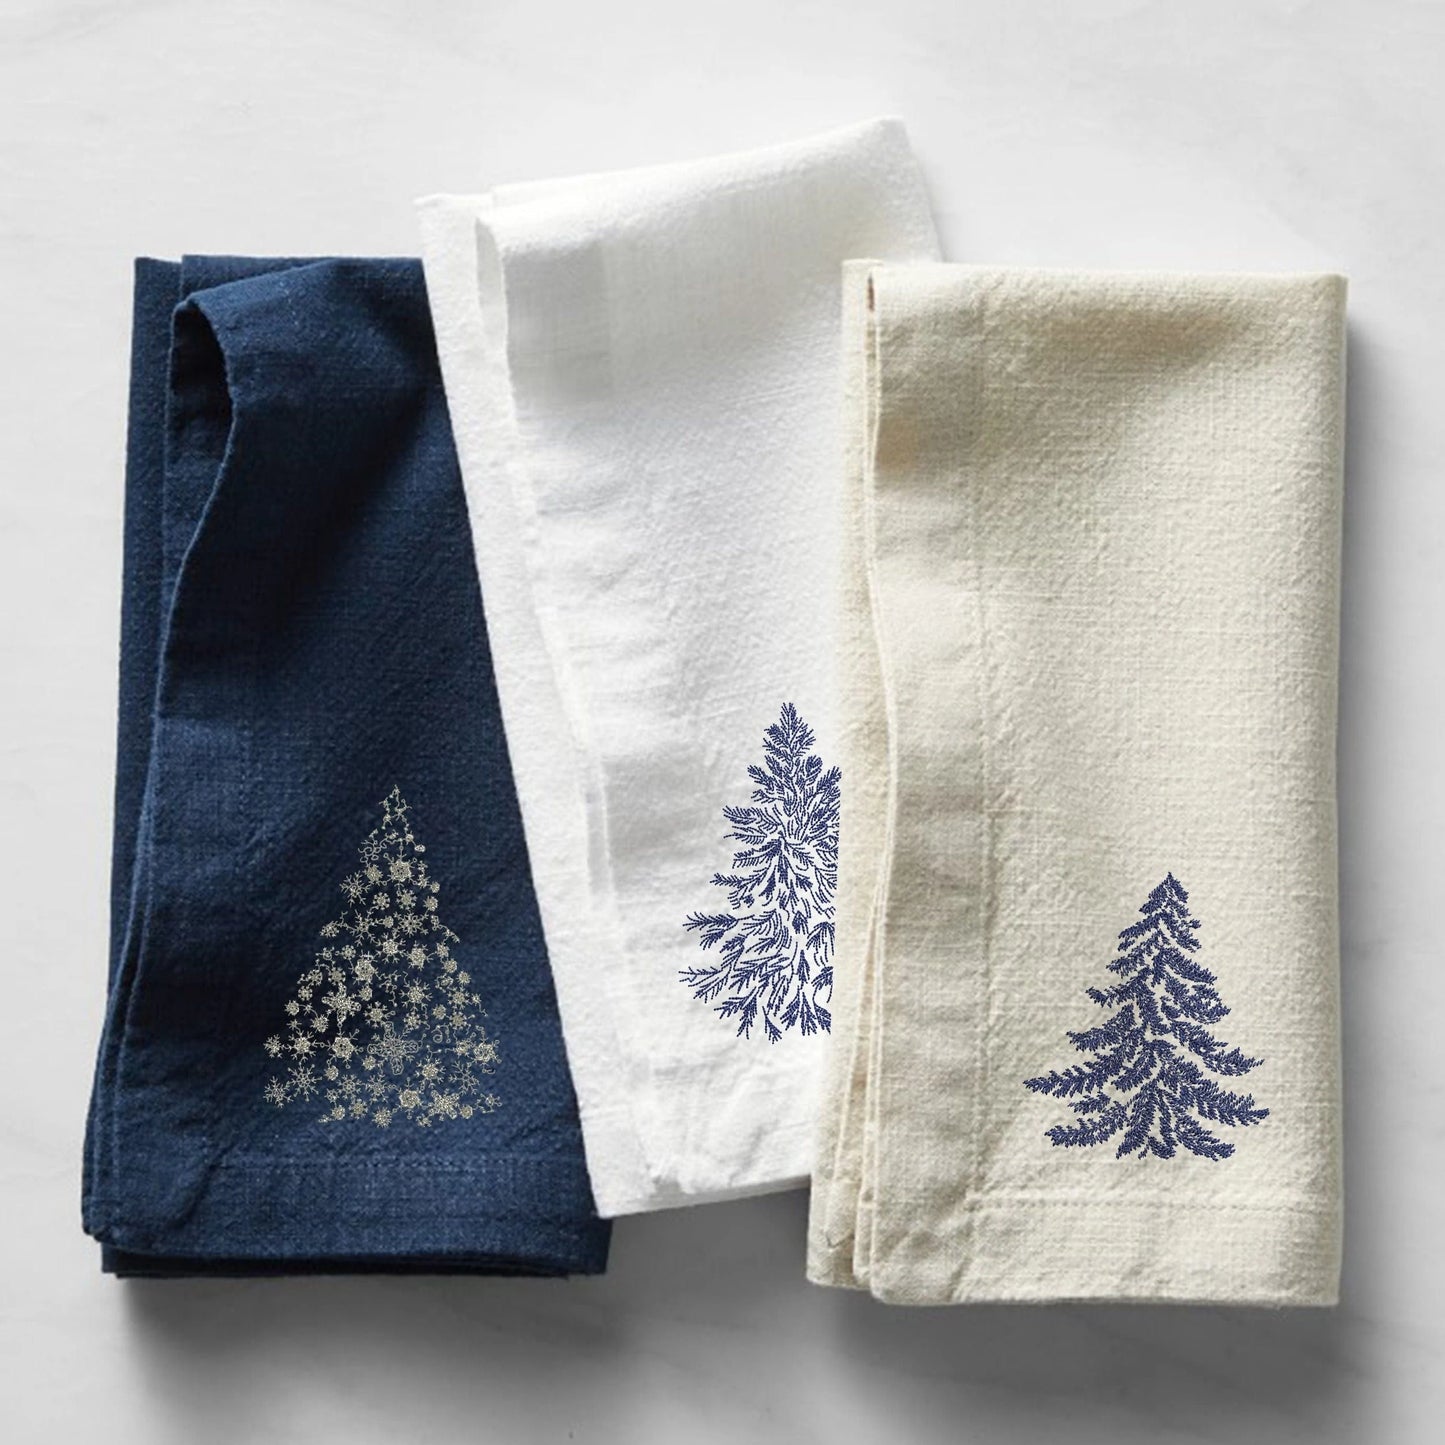 Chinoiserie Christmas Blue and White Tree machine embroidery design set on towels